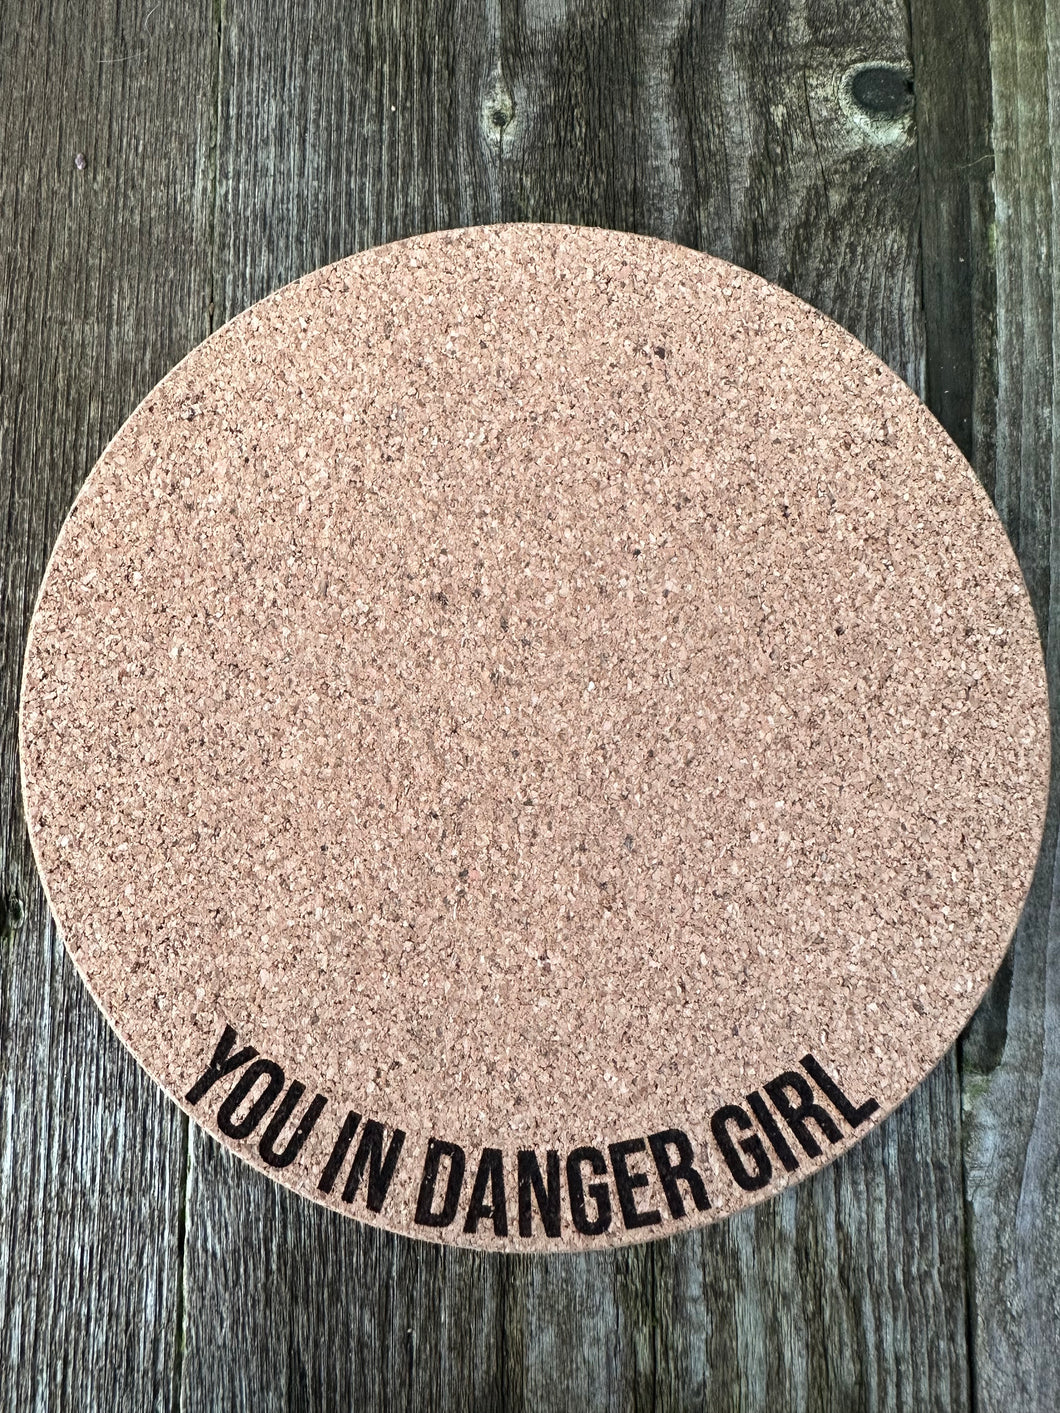 You in Danger Girl Cork Plant Mat - Engraved Cork Round - Cork Bottom - No Plastic or Rubber - All Natural Material